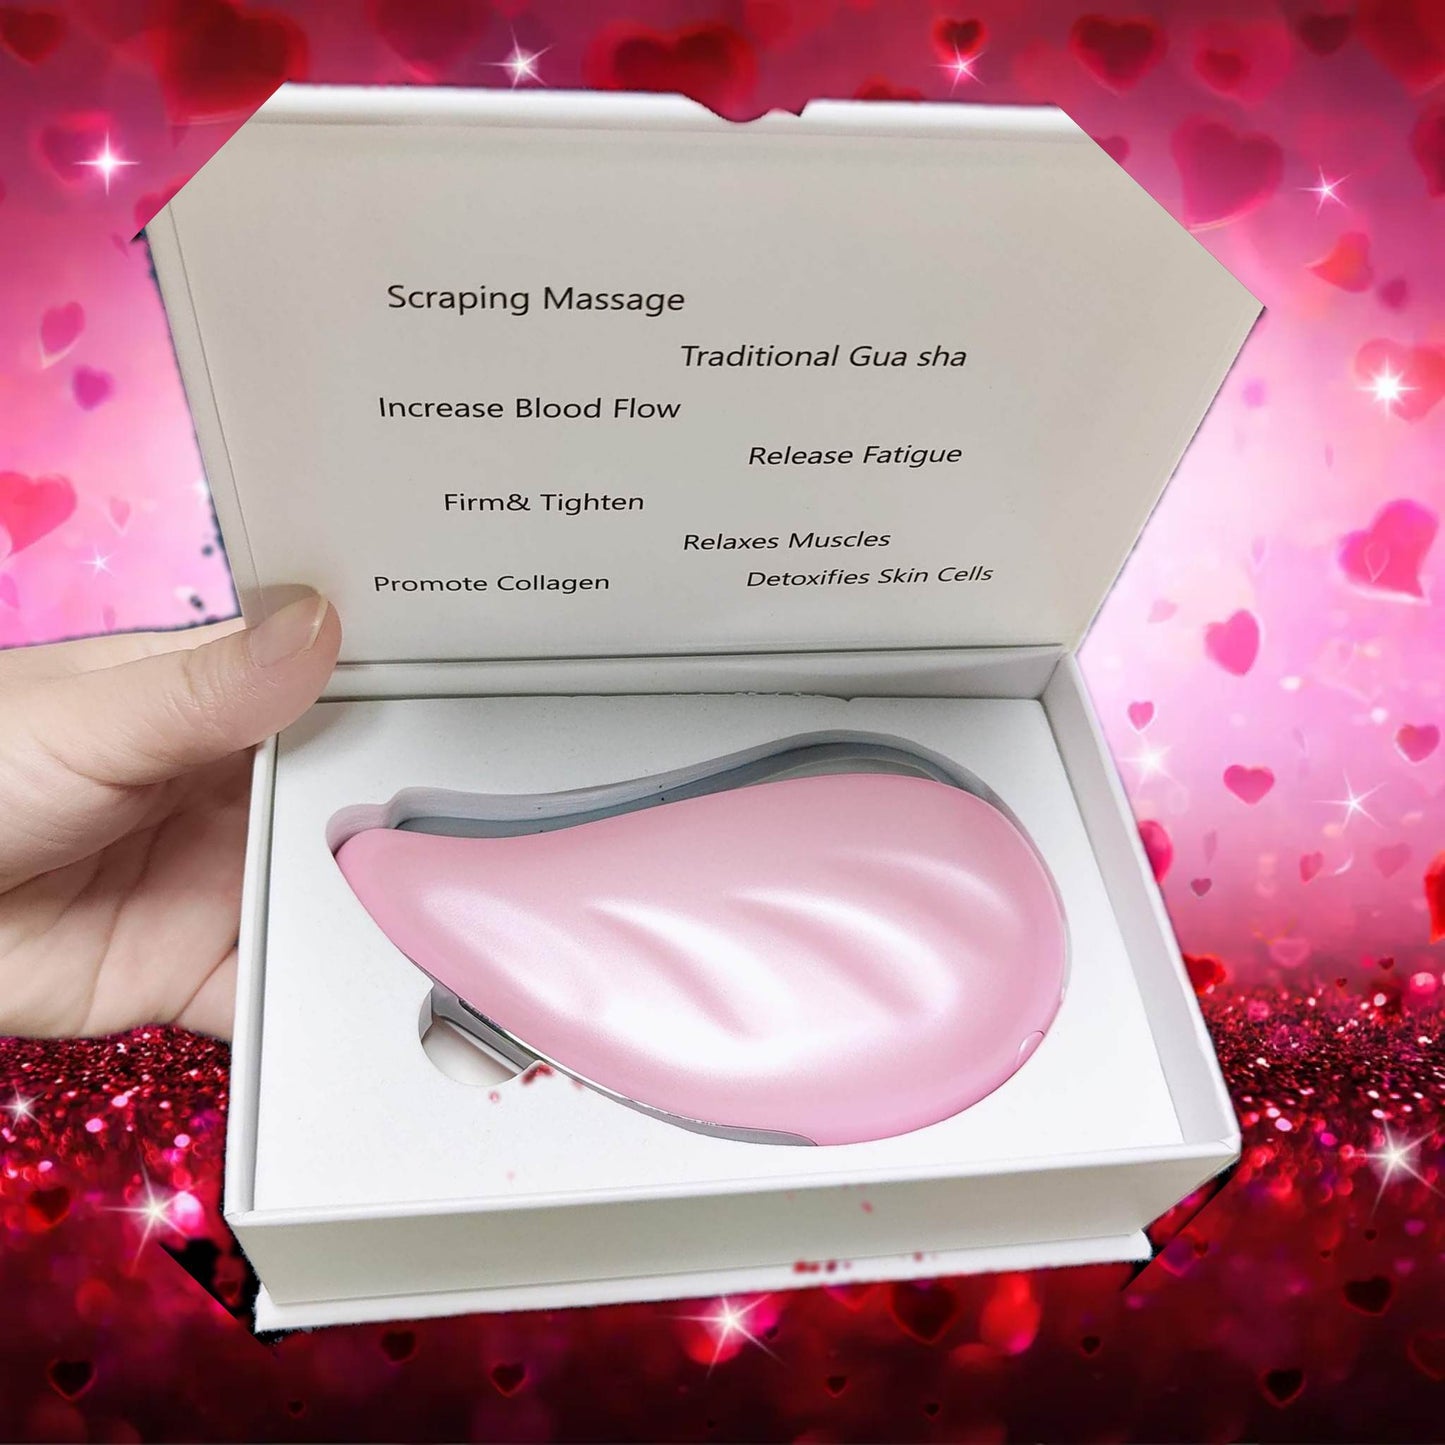 Skin “X” La Beaute Supercharged Gua Sha, Electric/LED massager for Face and body a Natural Skin Beauty